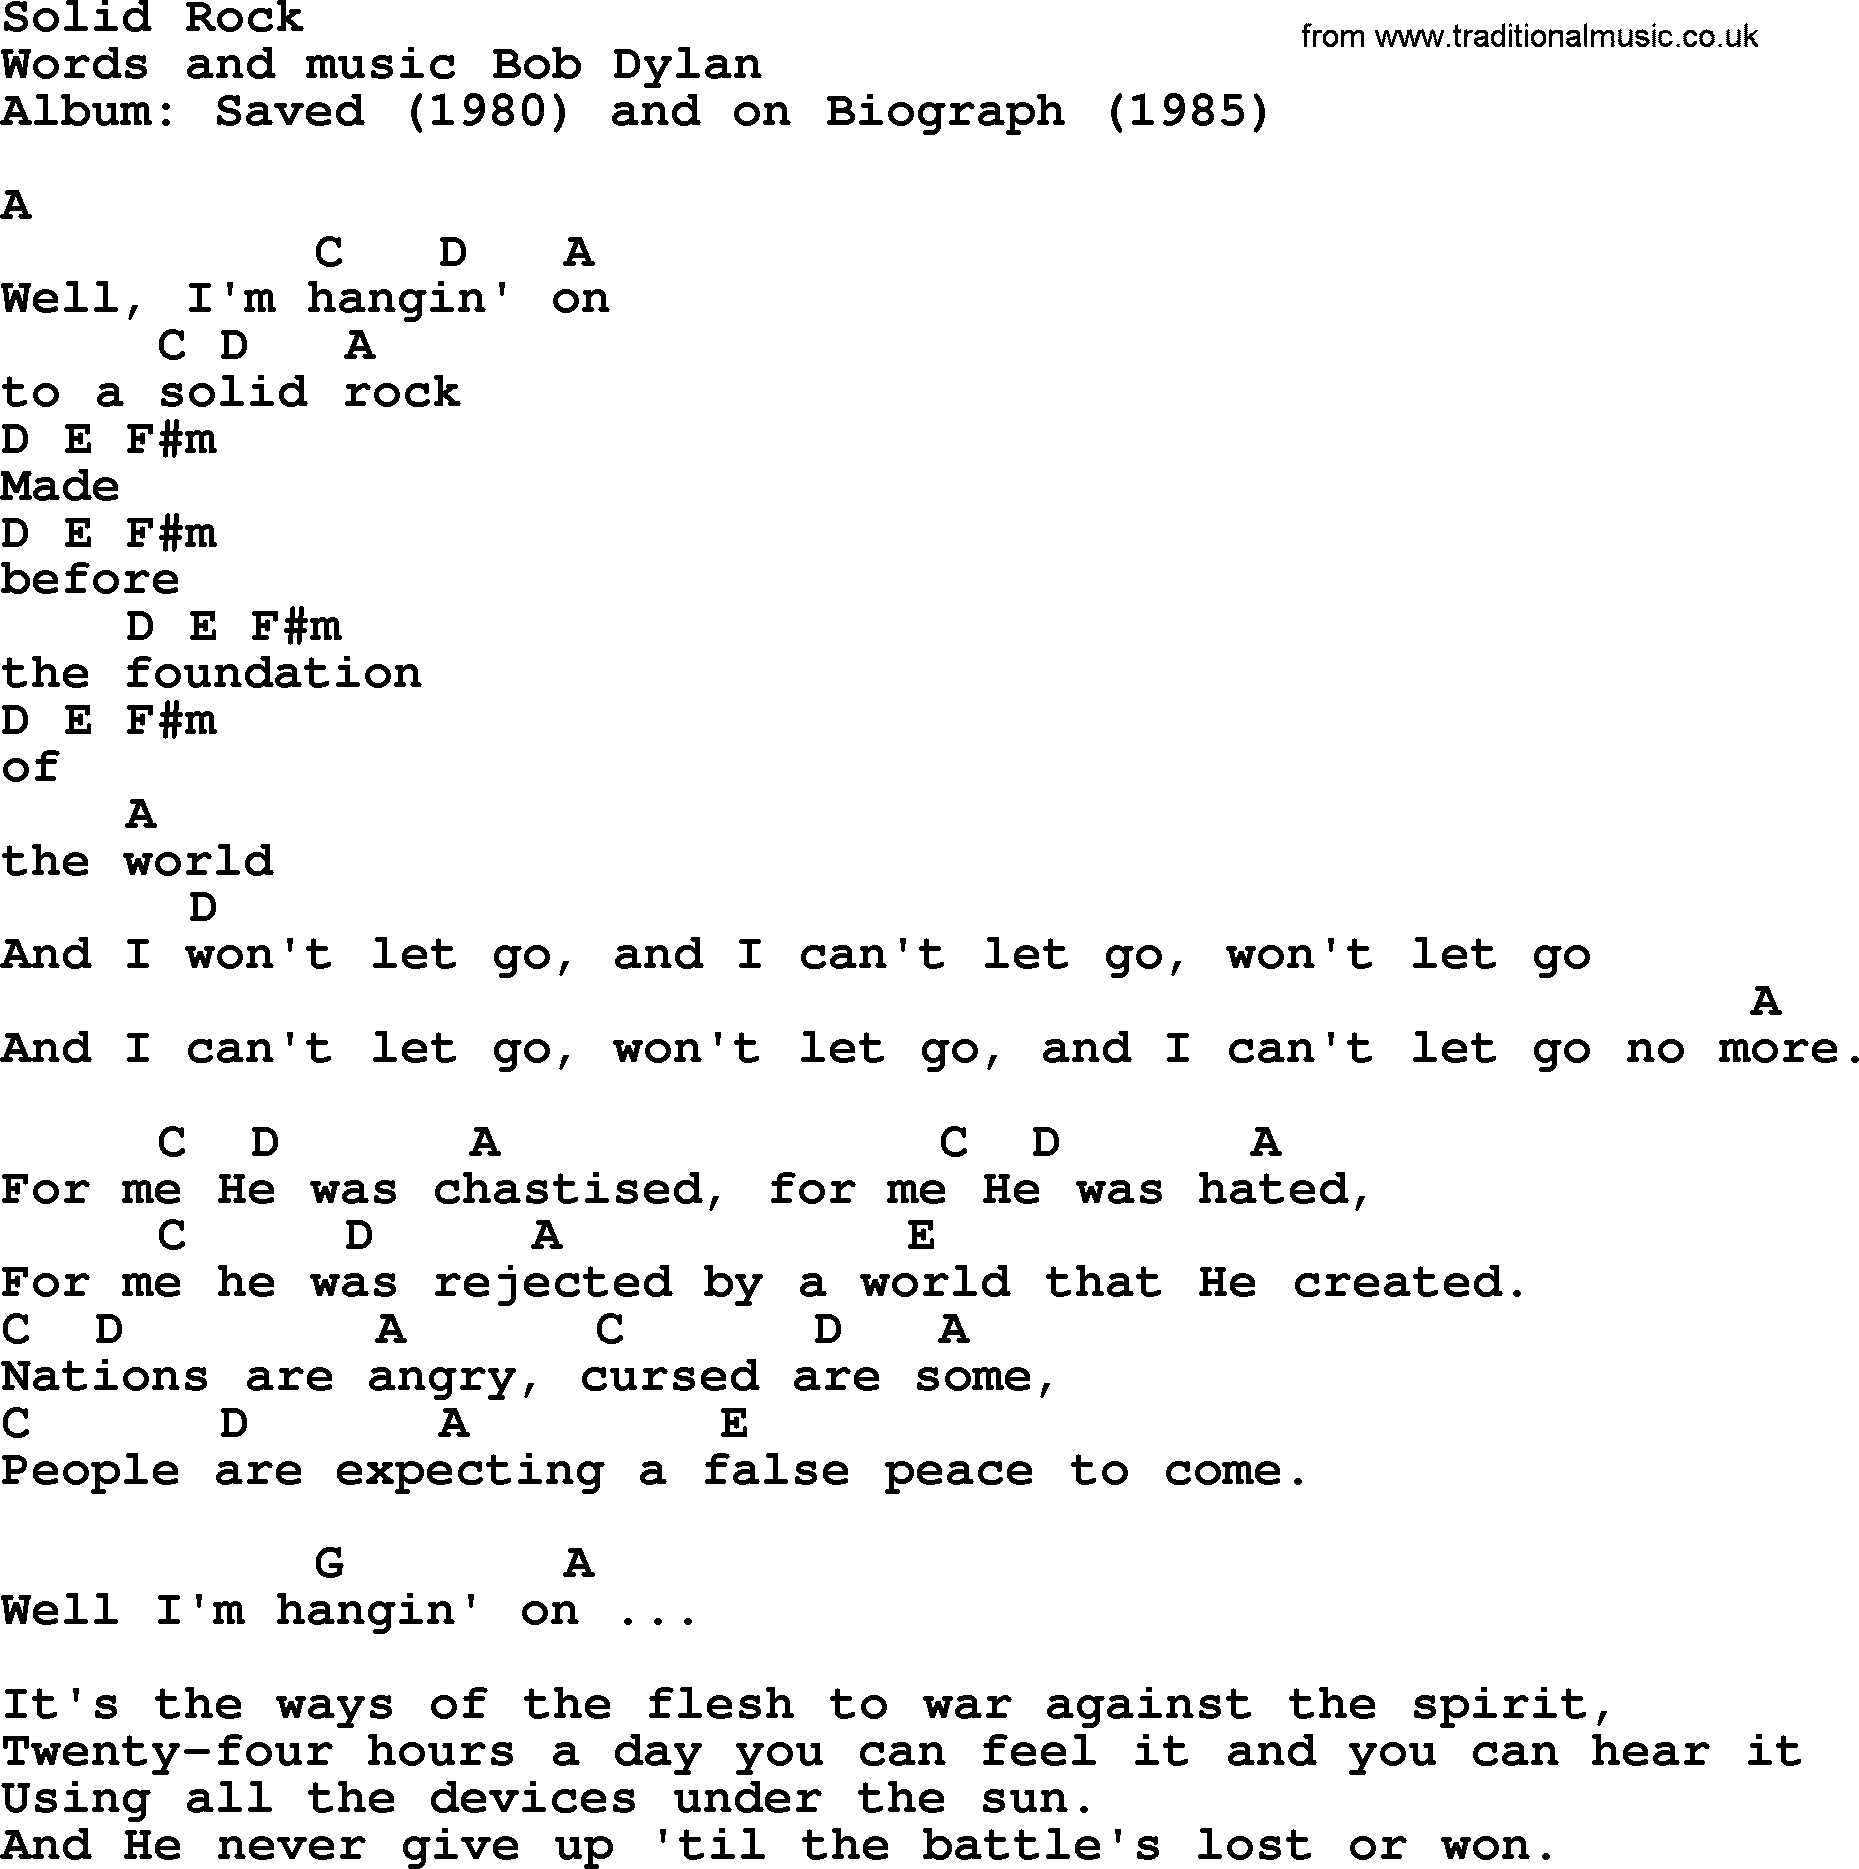 Bob Dylan song, lyrics with chords - Solid Rock